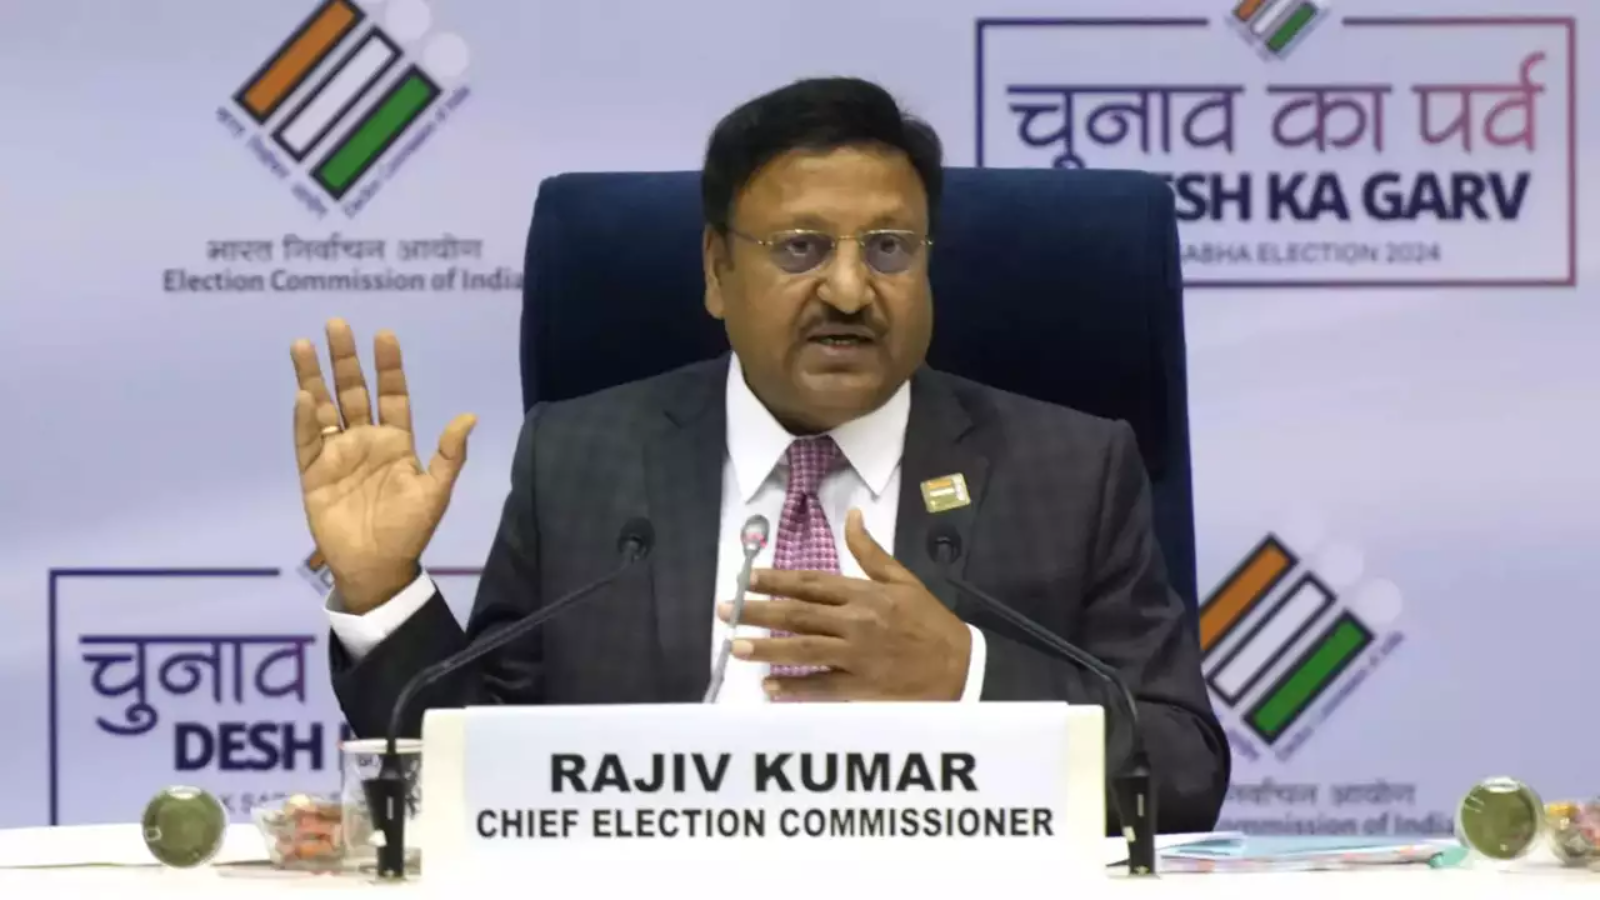 Election Commission's press conference is going to start shortly, opposition raises questions